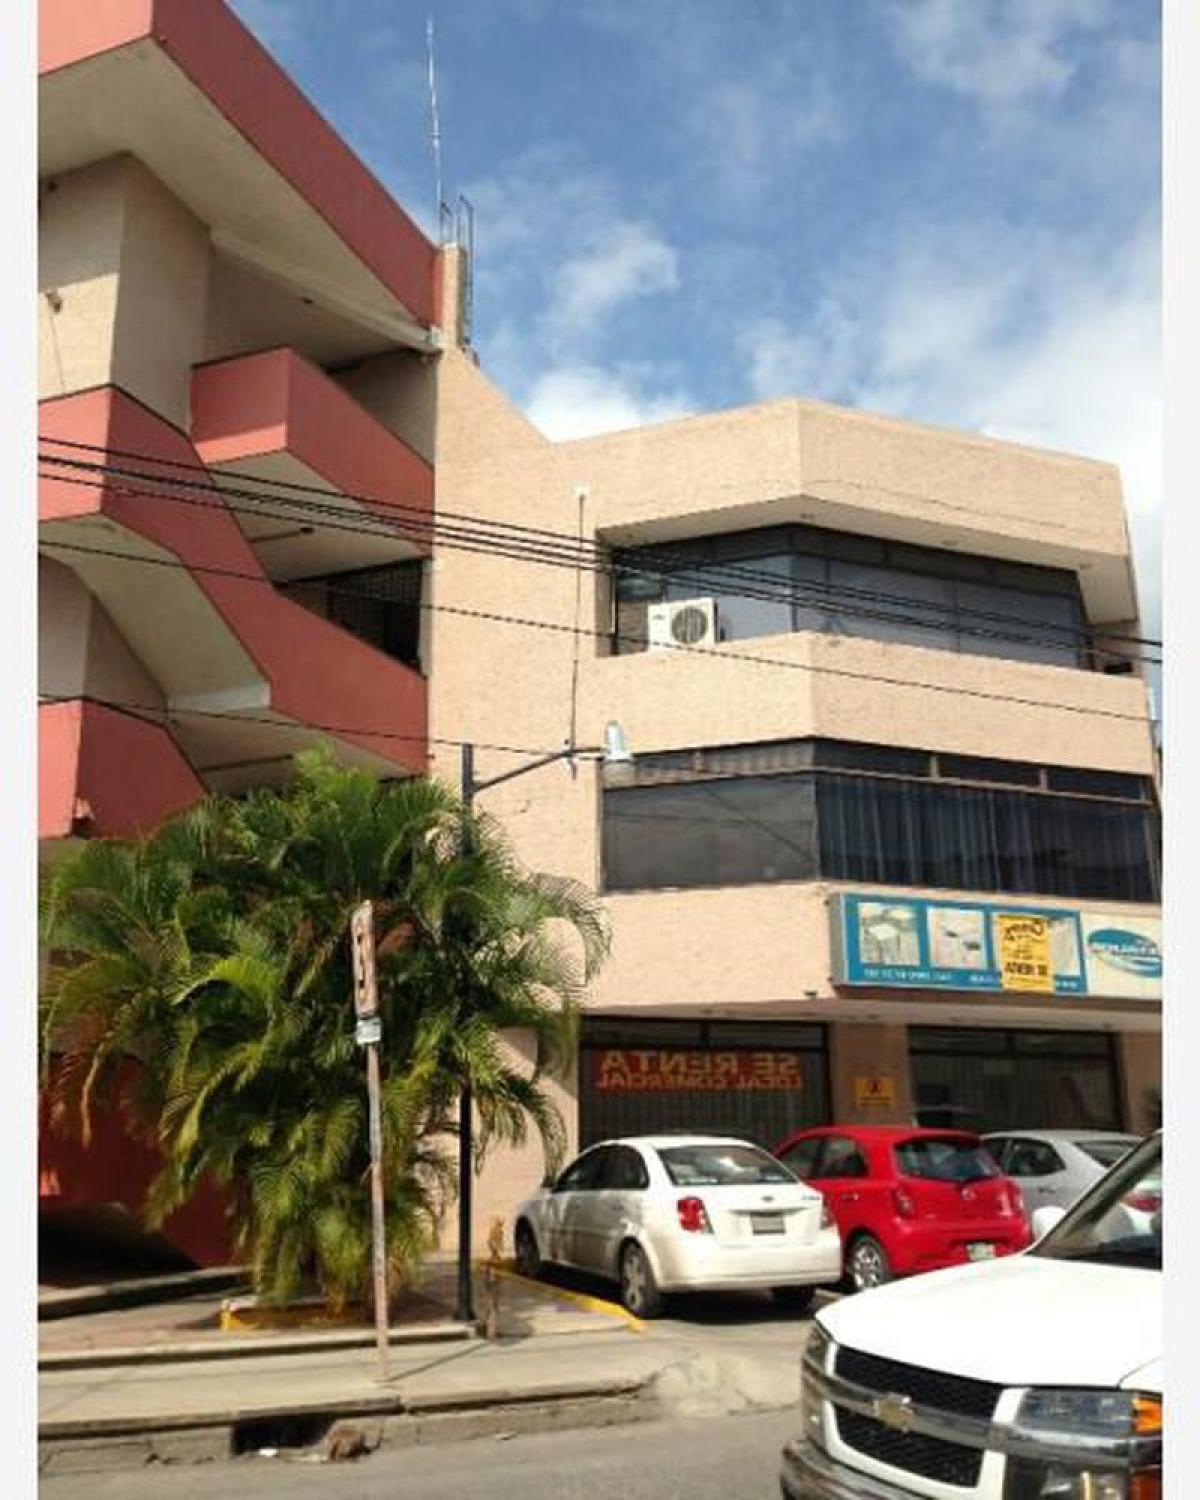 Picture of Office For Sale in Chiapas, Chiapas, Mexico